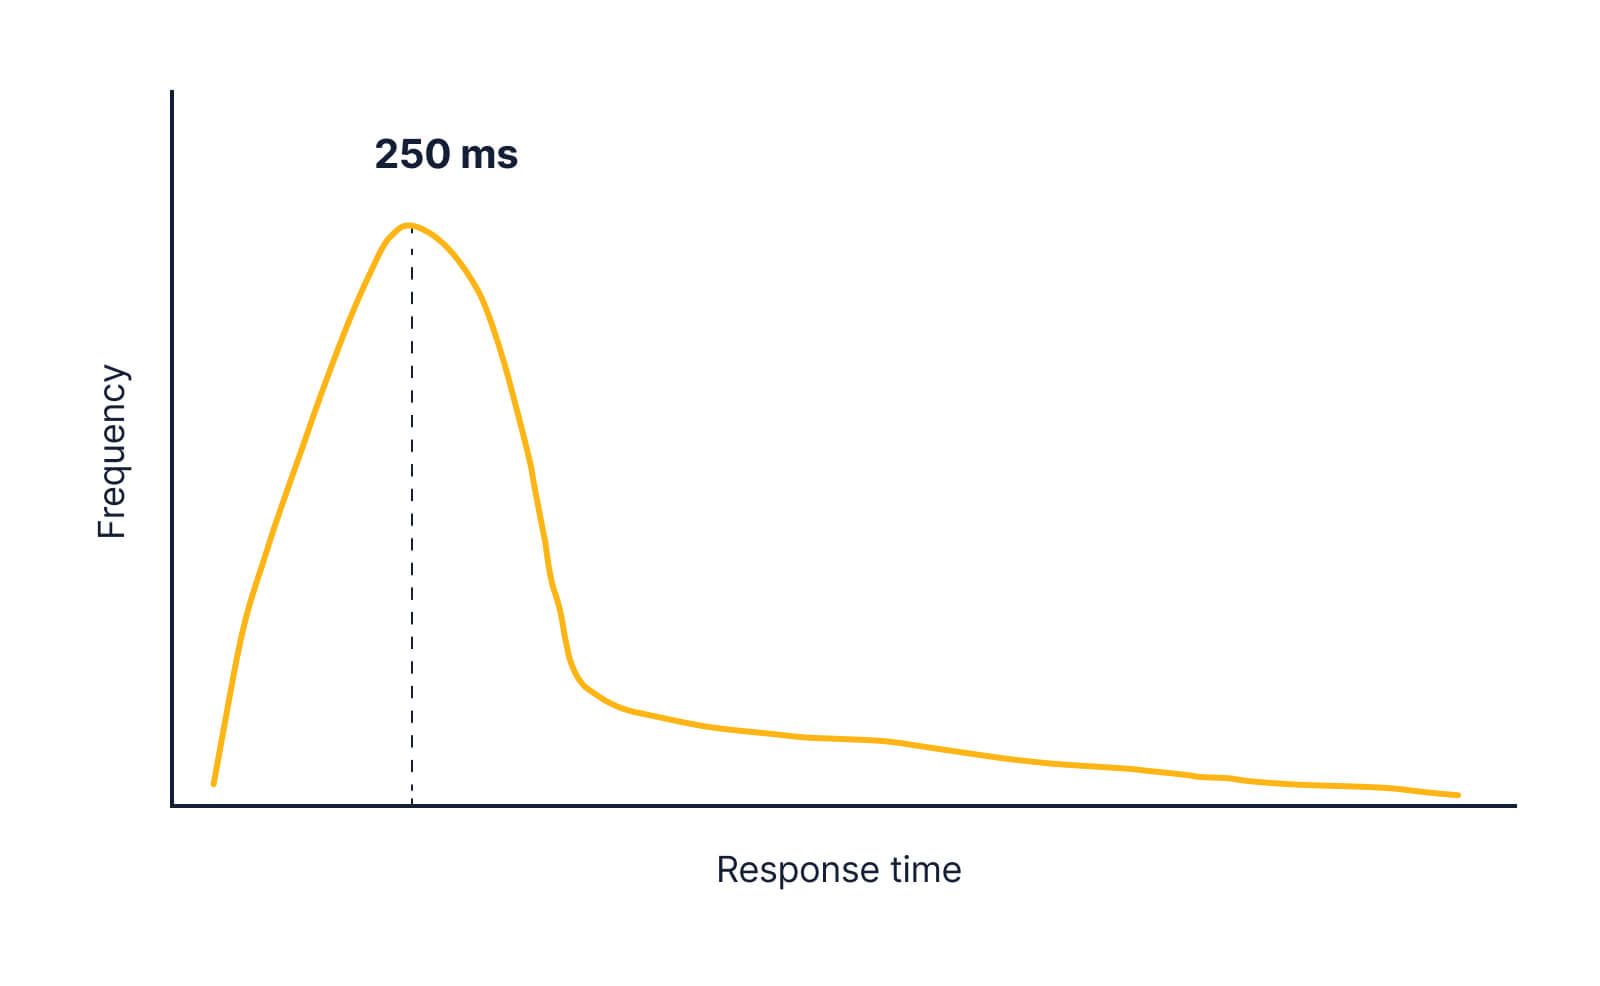 A curve with frequency on the vertical axis and response time on the horizontal axis. The curve has a relatively sharp peak at the beginning labelled 250 ms, it then falls off quickly before shallowing out into a long tail